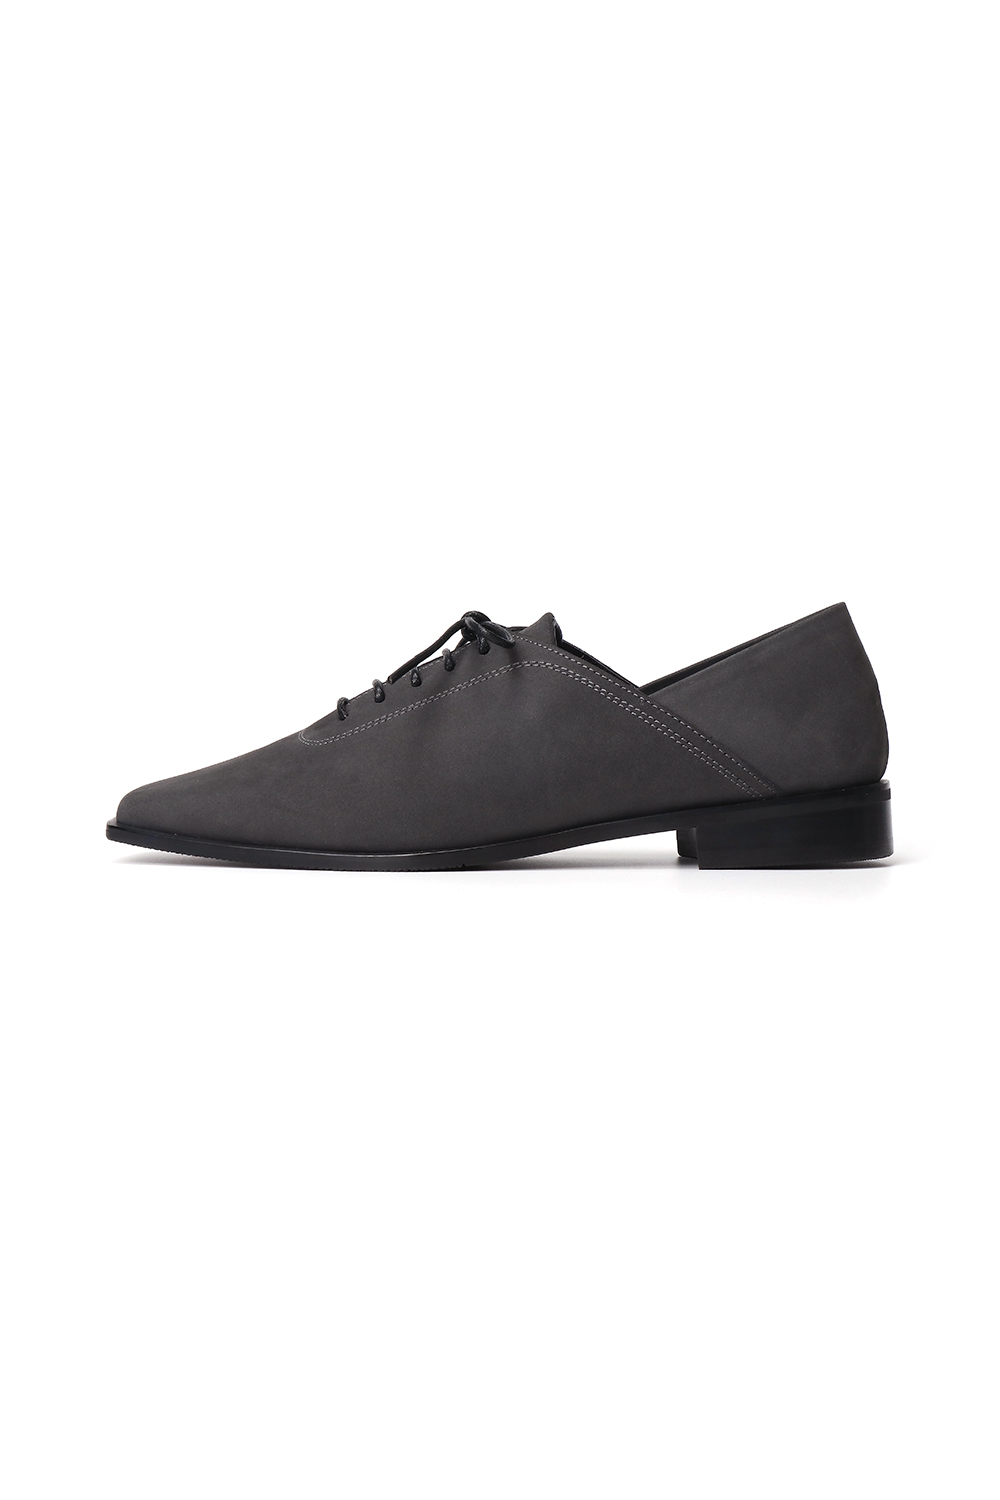 MAZEN SQUARE TOE DERBY SHOES [CHARCOAL]